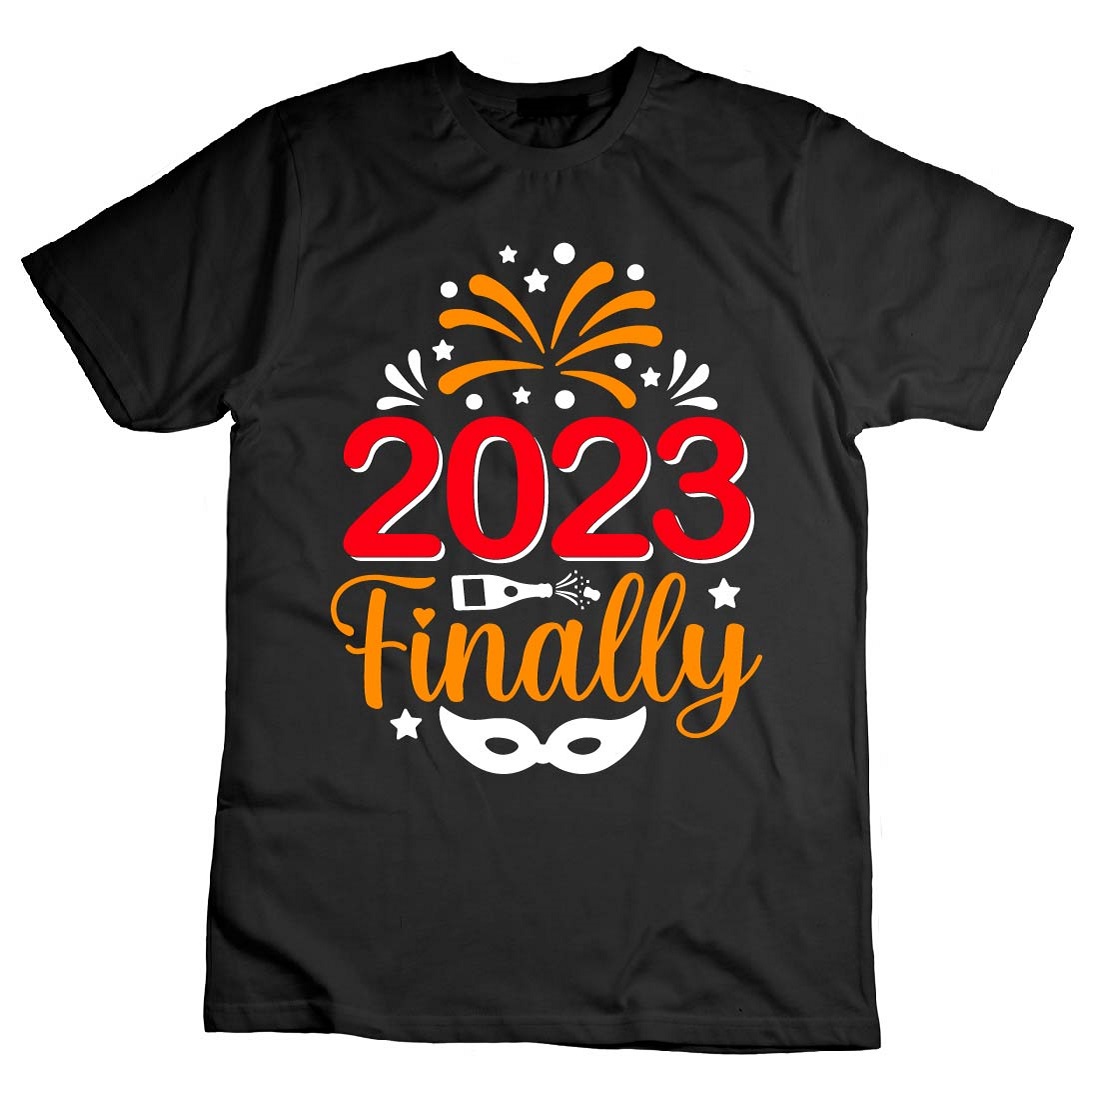 Finally Happy New Year T-Shirt Design Bundle cover image.